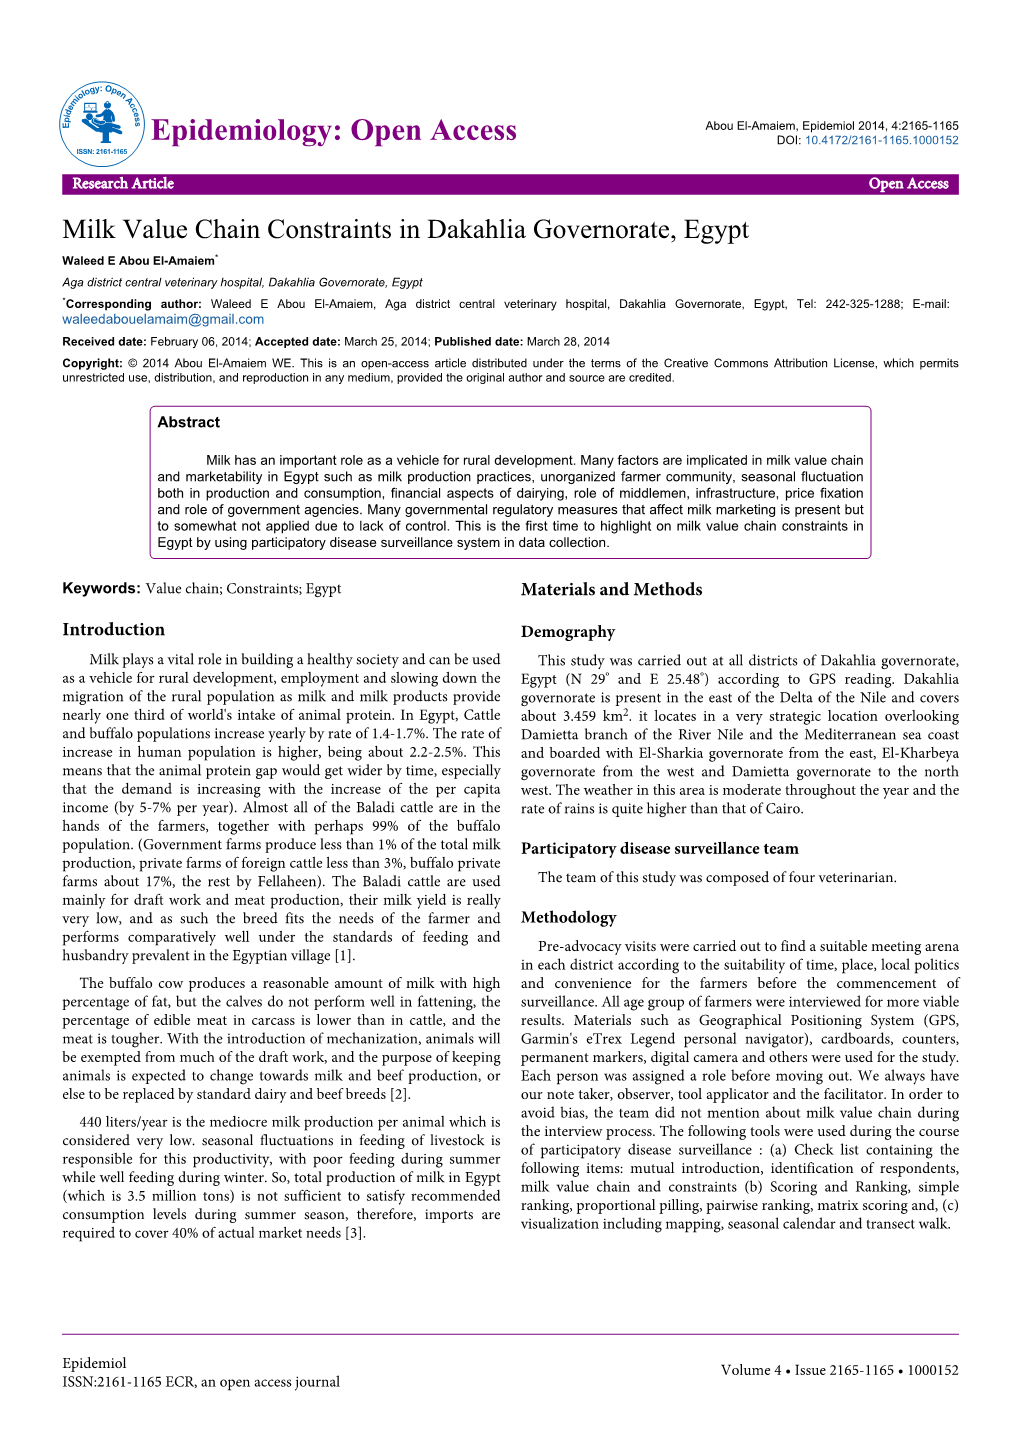 Milk Value Chain Constraints in Dakahlia Governorate, Egypt